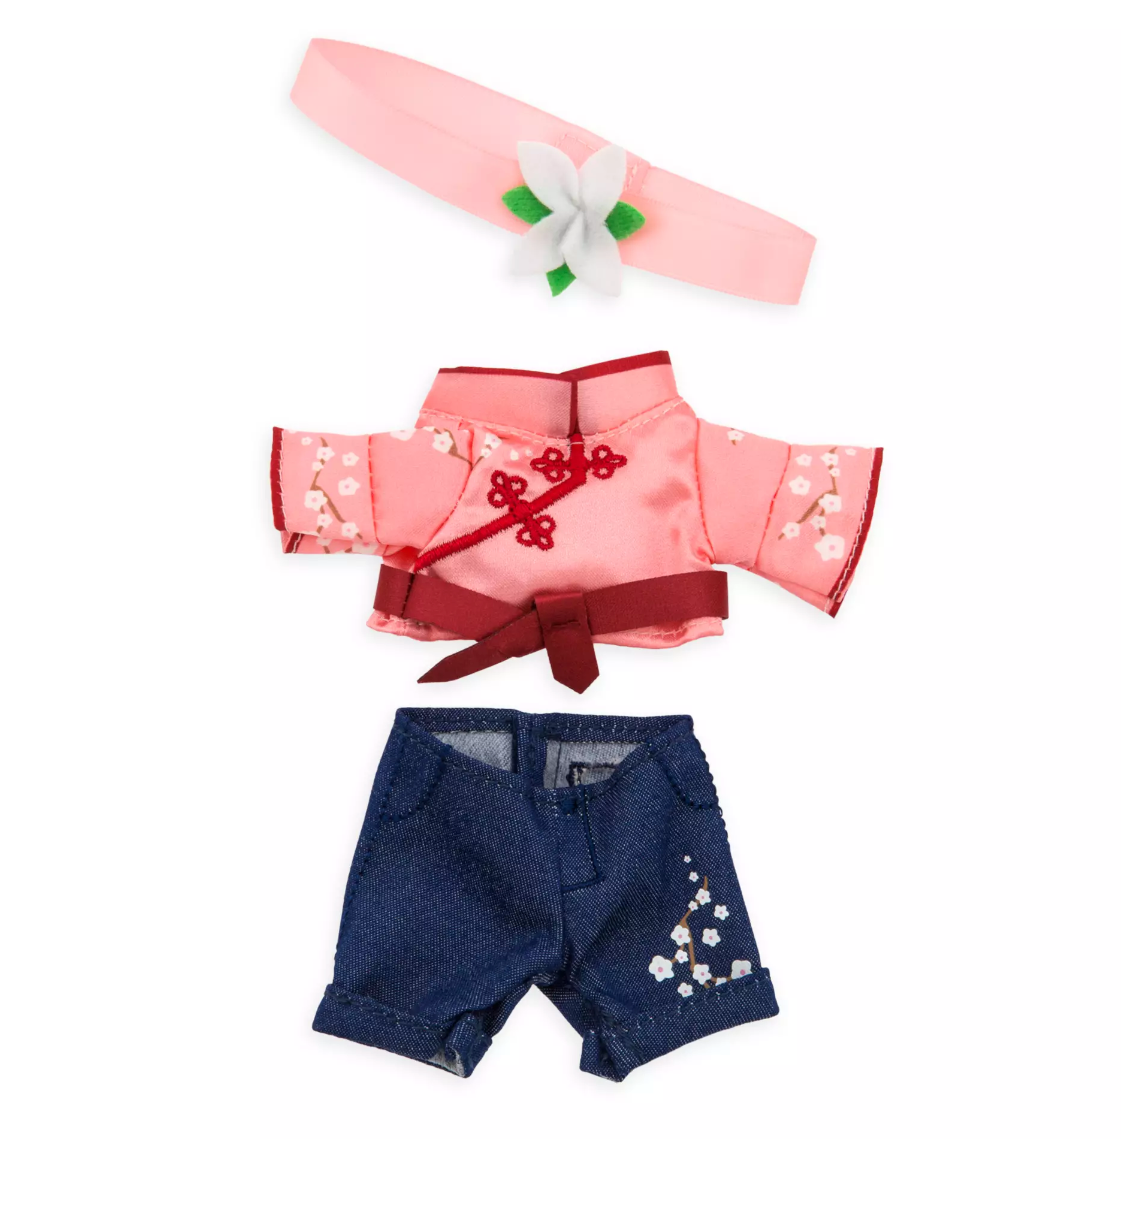 Disney NuiMOs Mulan Inspired Outfit New with Card